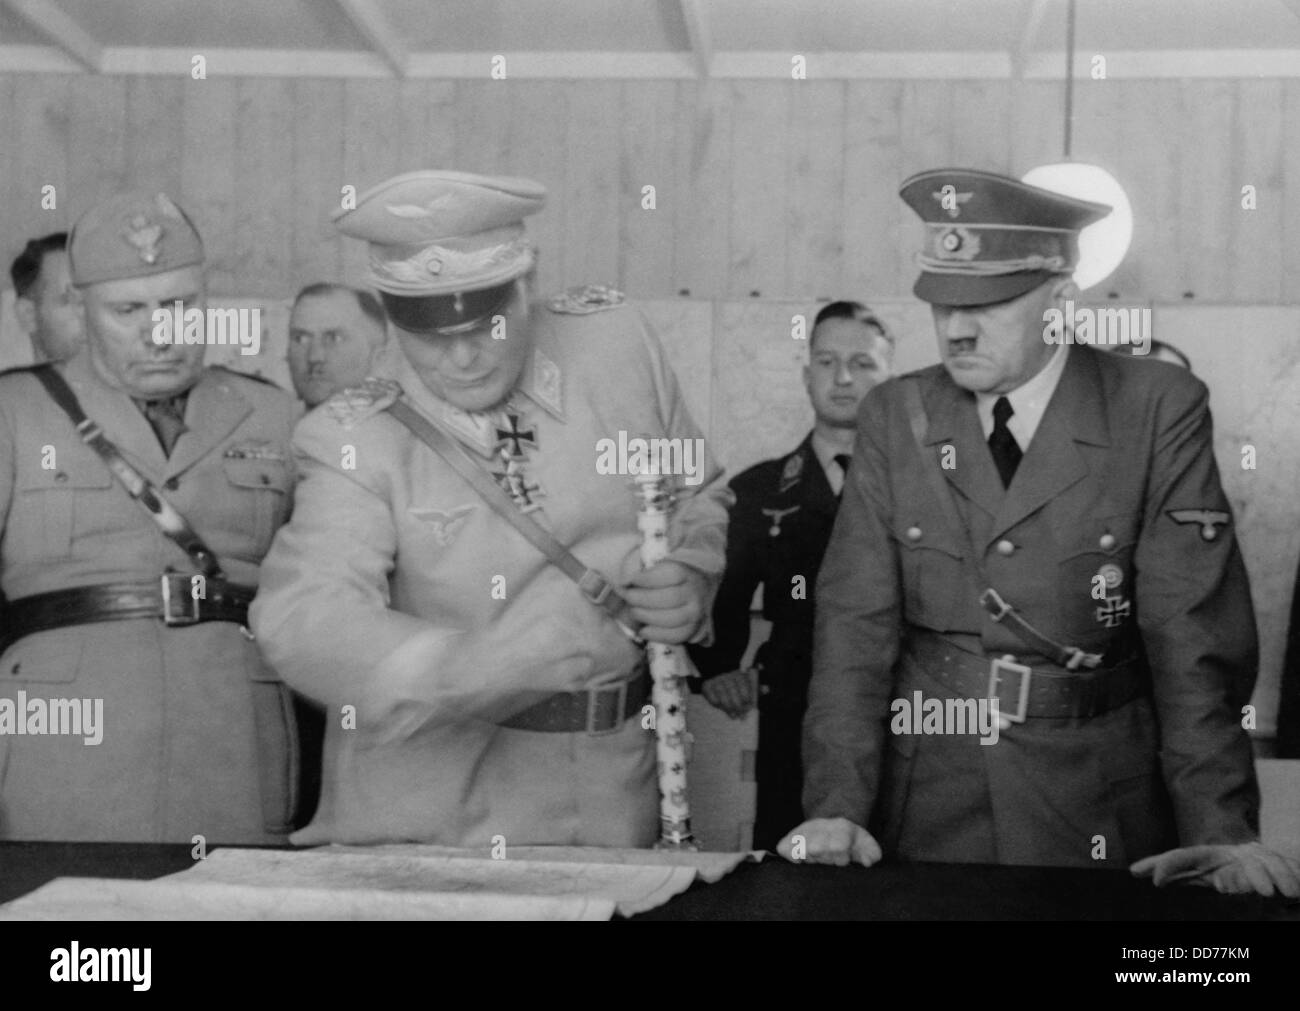 Adolf Hitler, Hermann Goering, and Benito Mussolini looking at map, August 26, 1941. German military officers standing behind Stock Photo